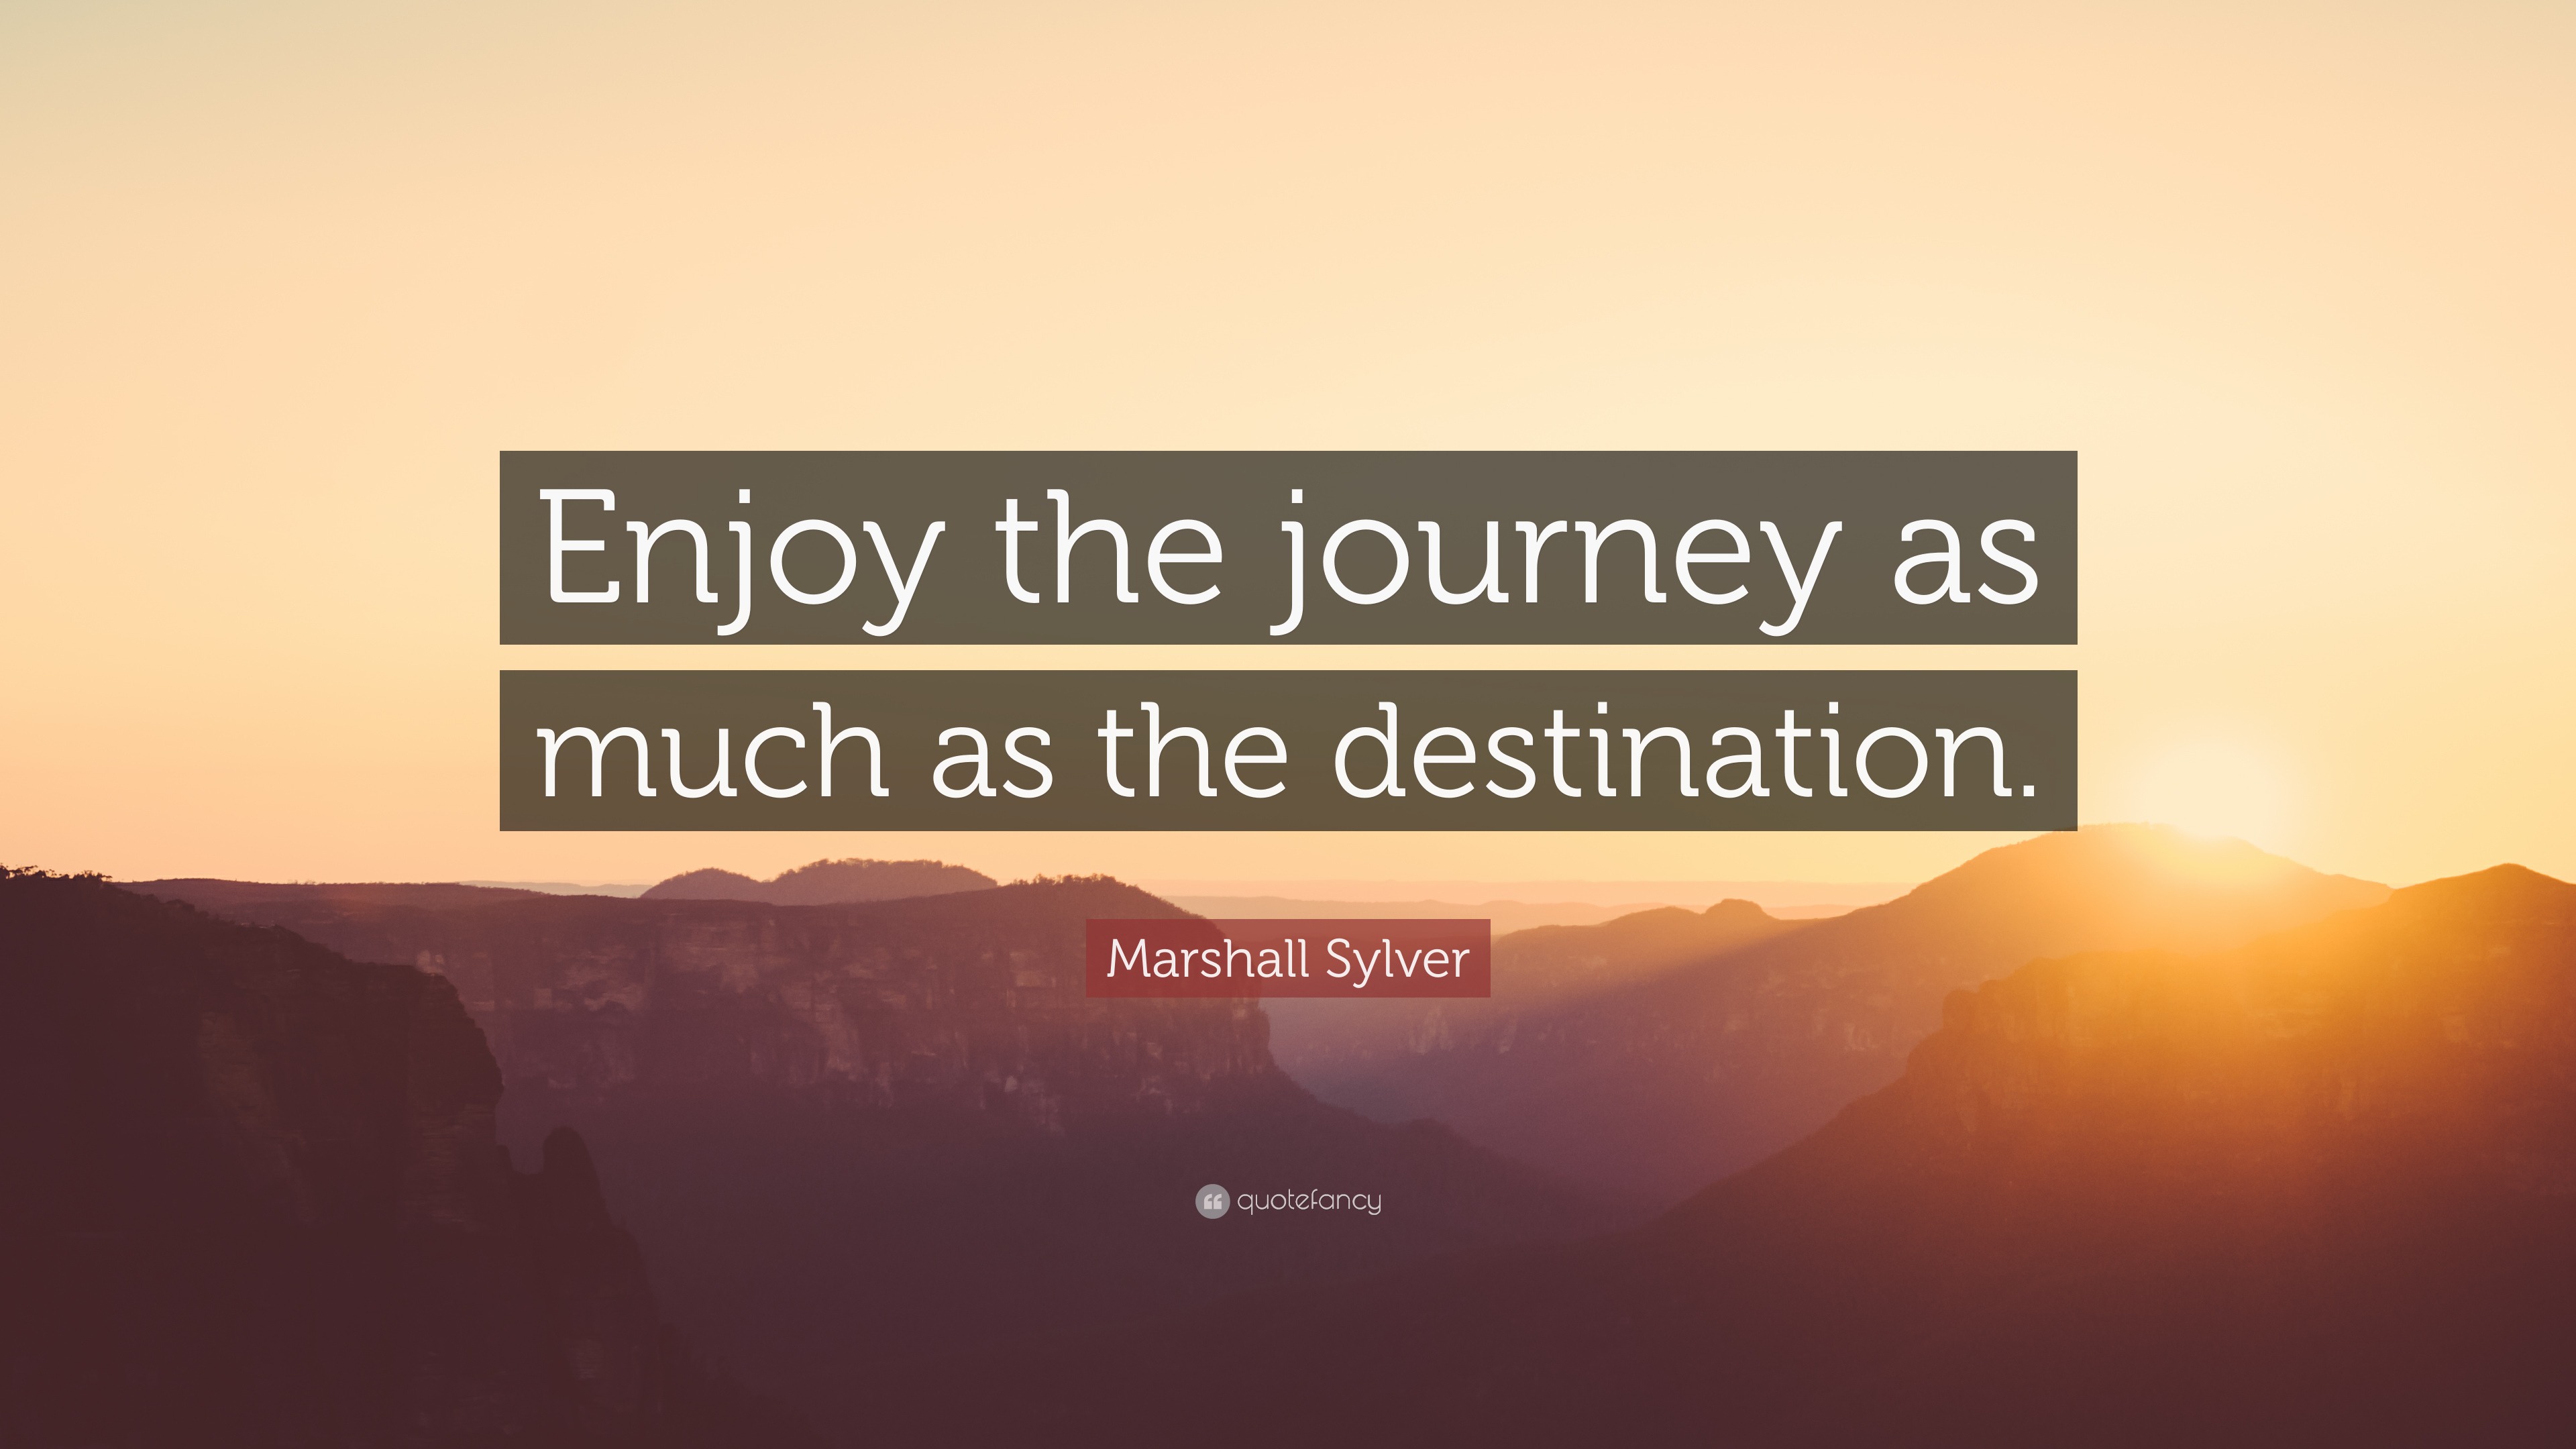 Marshall Sylver quote: Enjoy the journey as much as the destination.